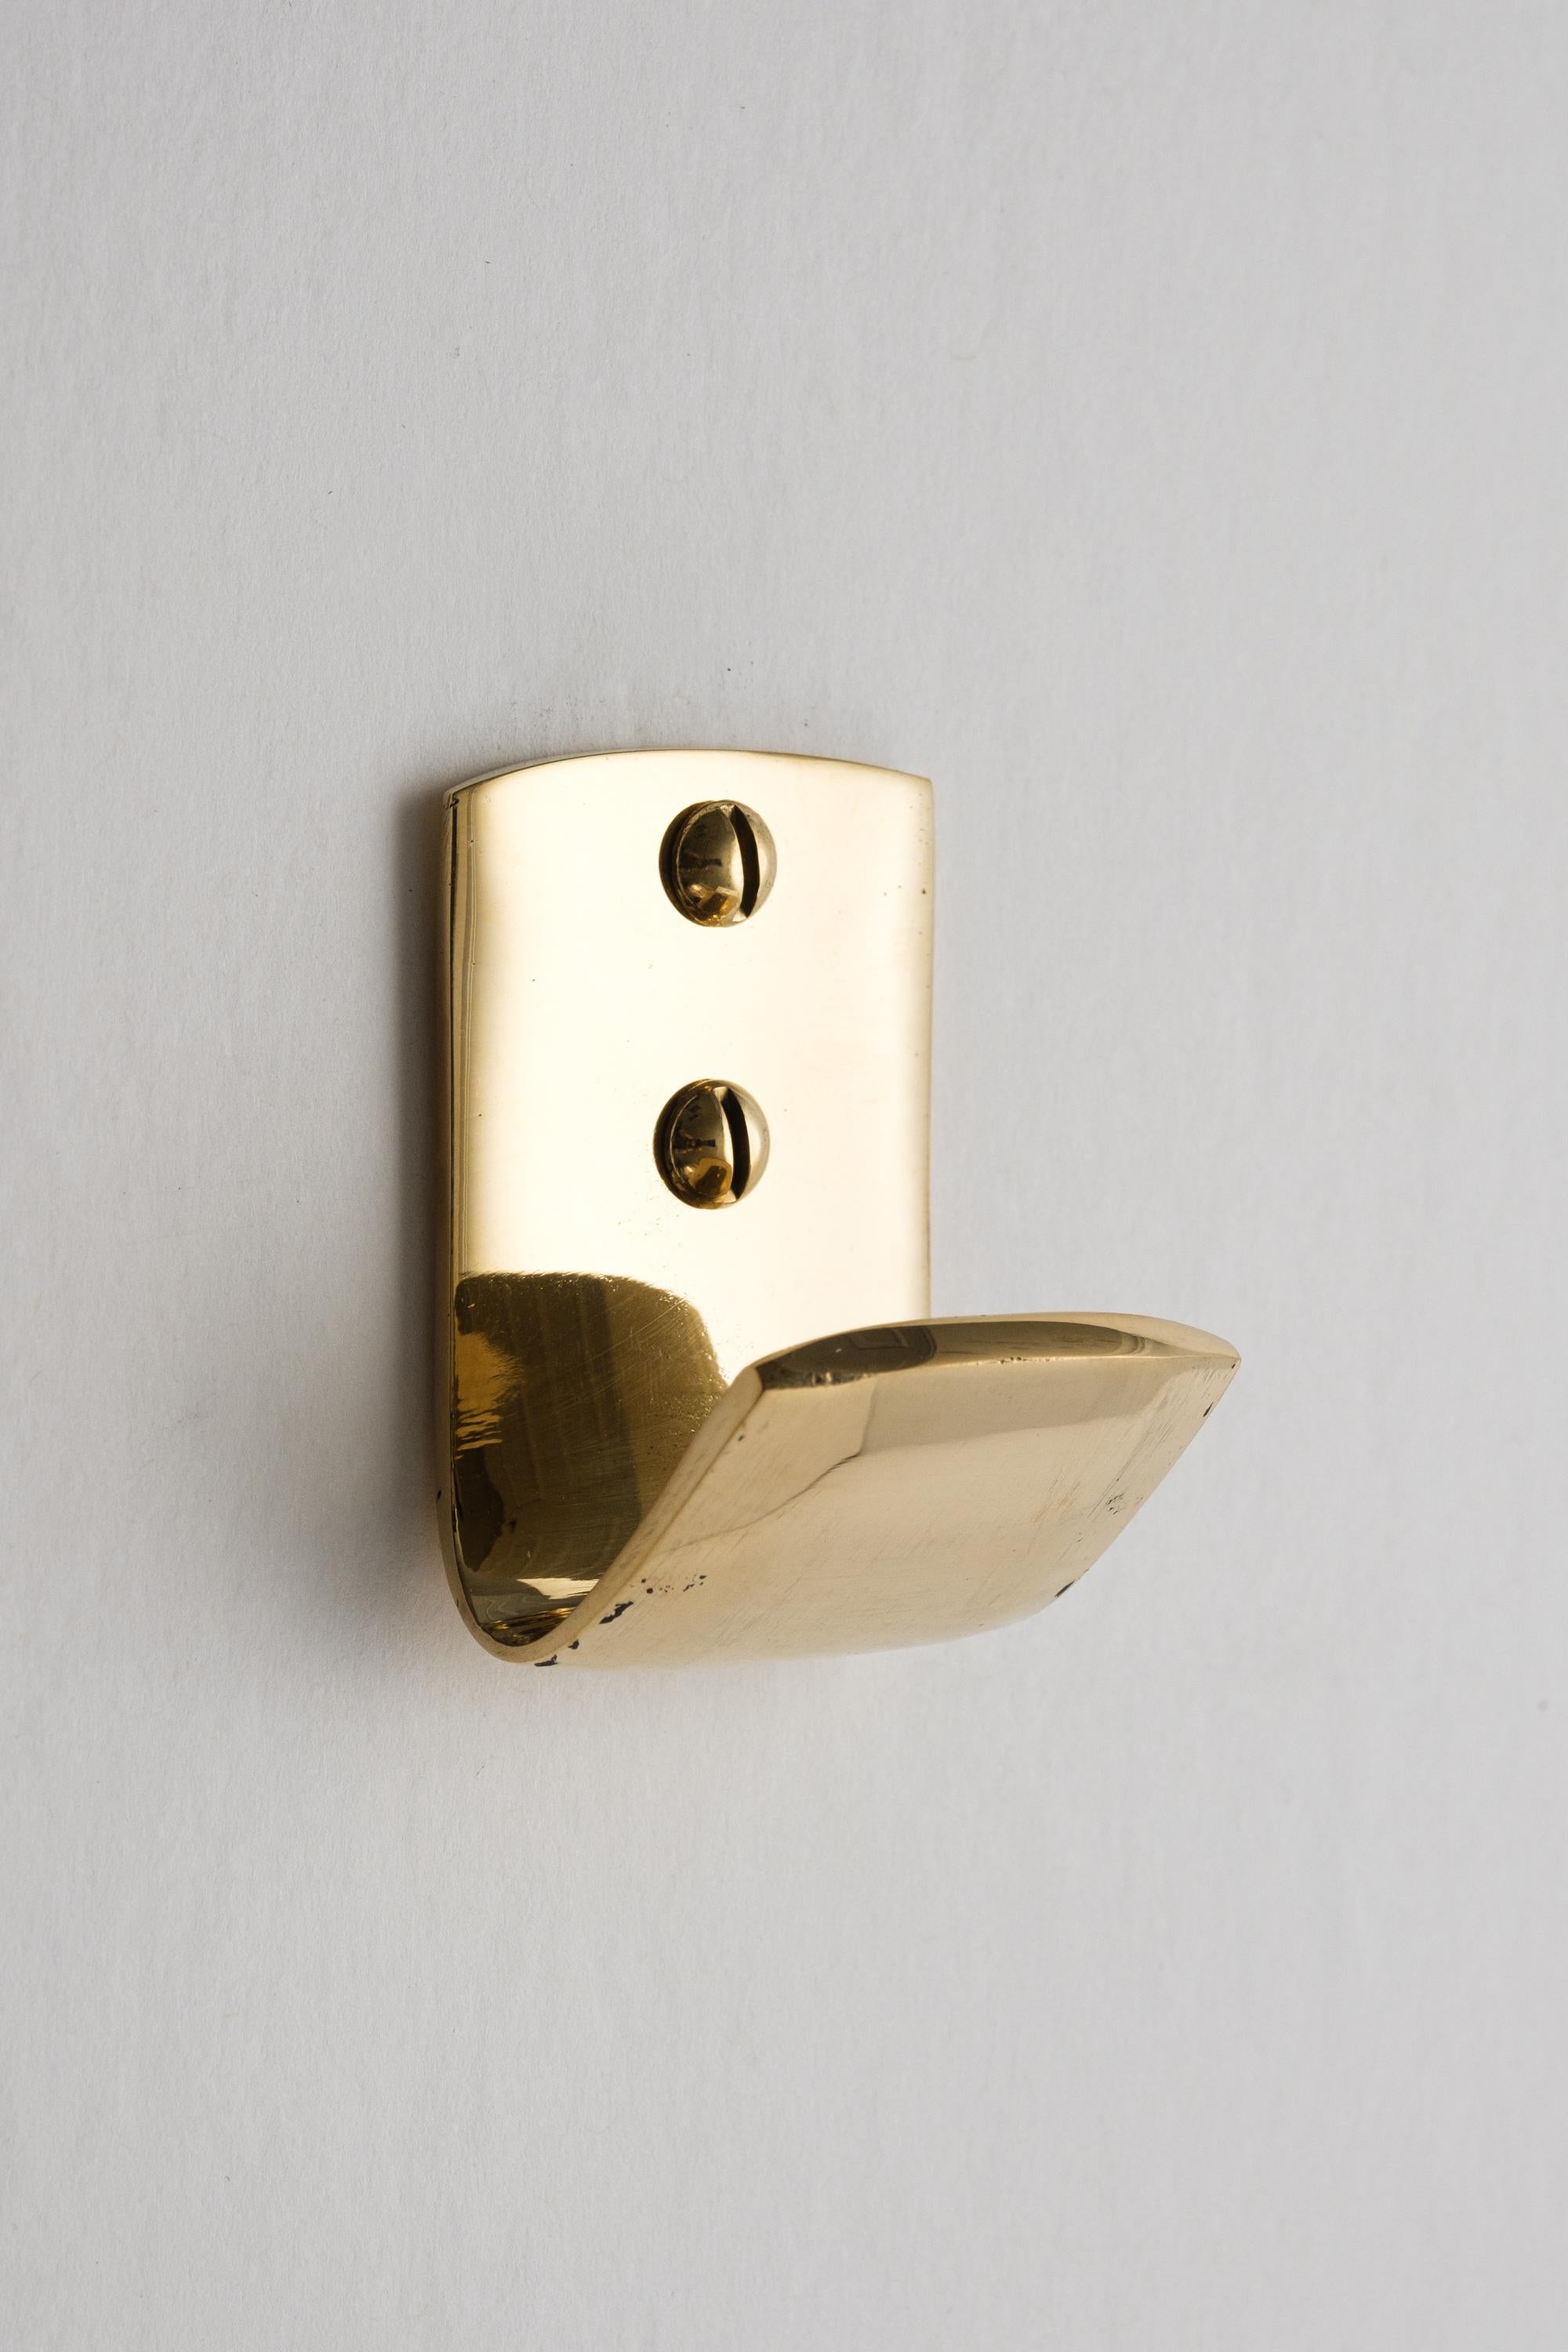 Carl Auböck #5262 polished brass hook. Designed in the 1950s, this versatile and Minimalist Viennese hook is executed in polished brass by Werkstätte Carl Auböck, Austria.

Produced by Carl Auböck IV in the original Auböck workshop in the 7th